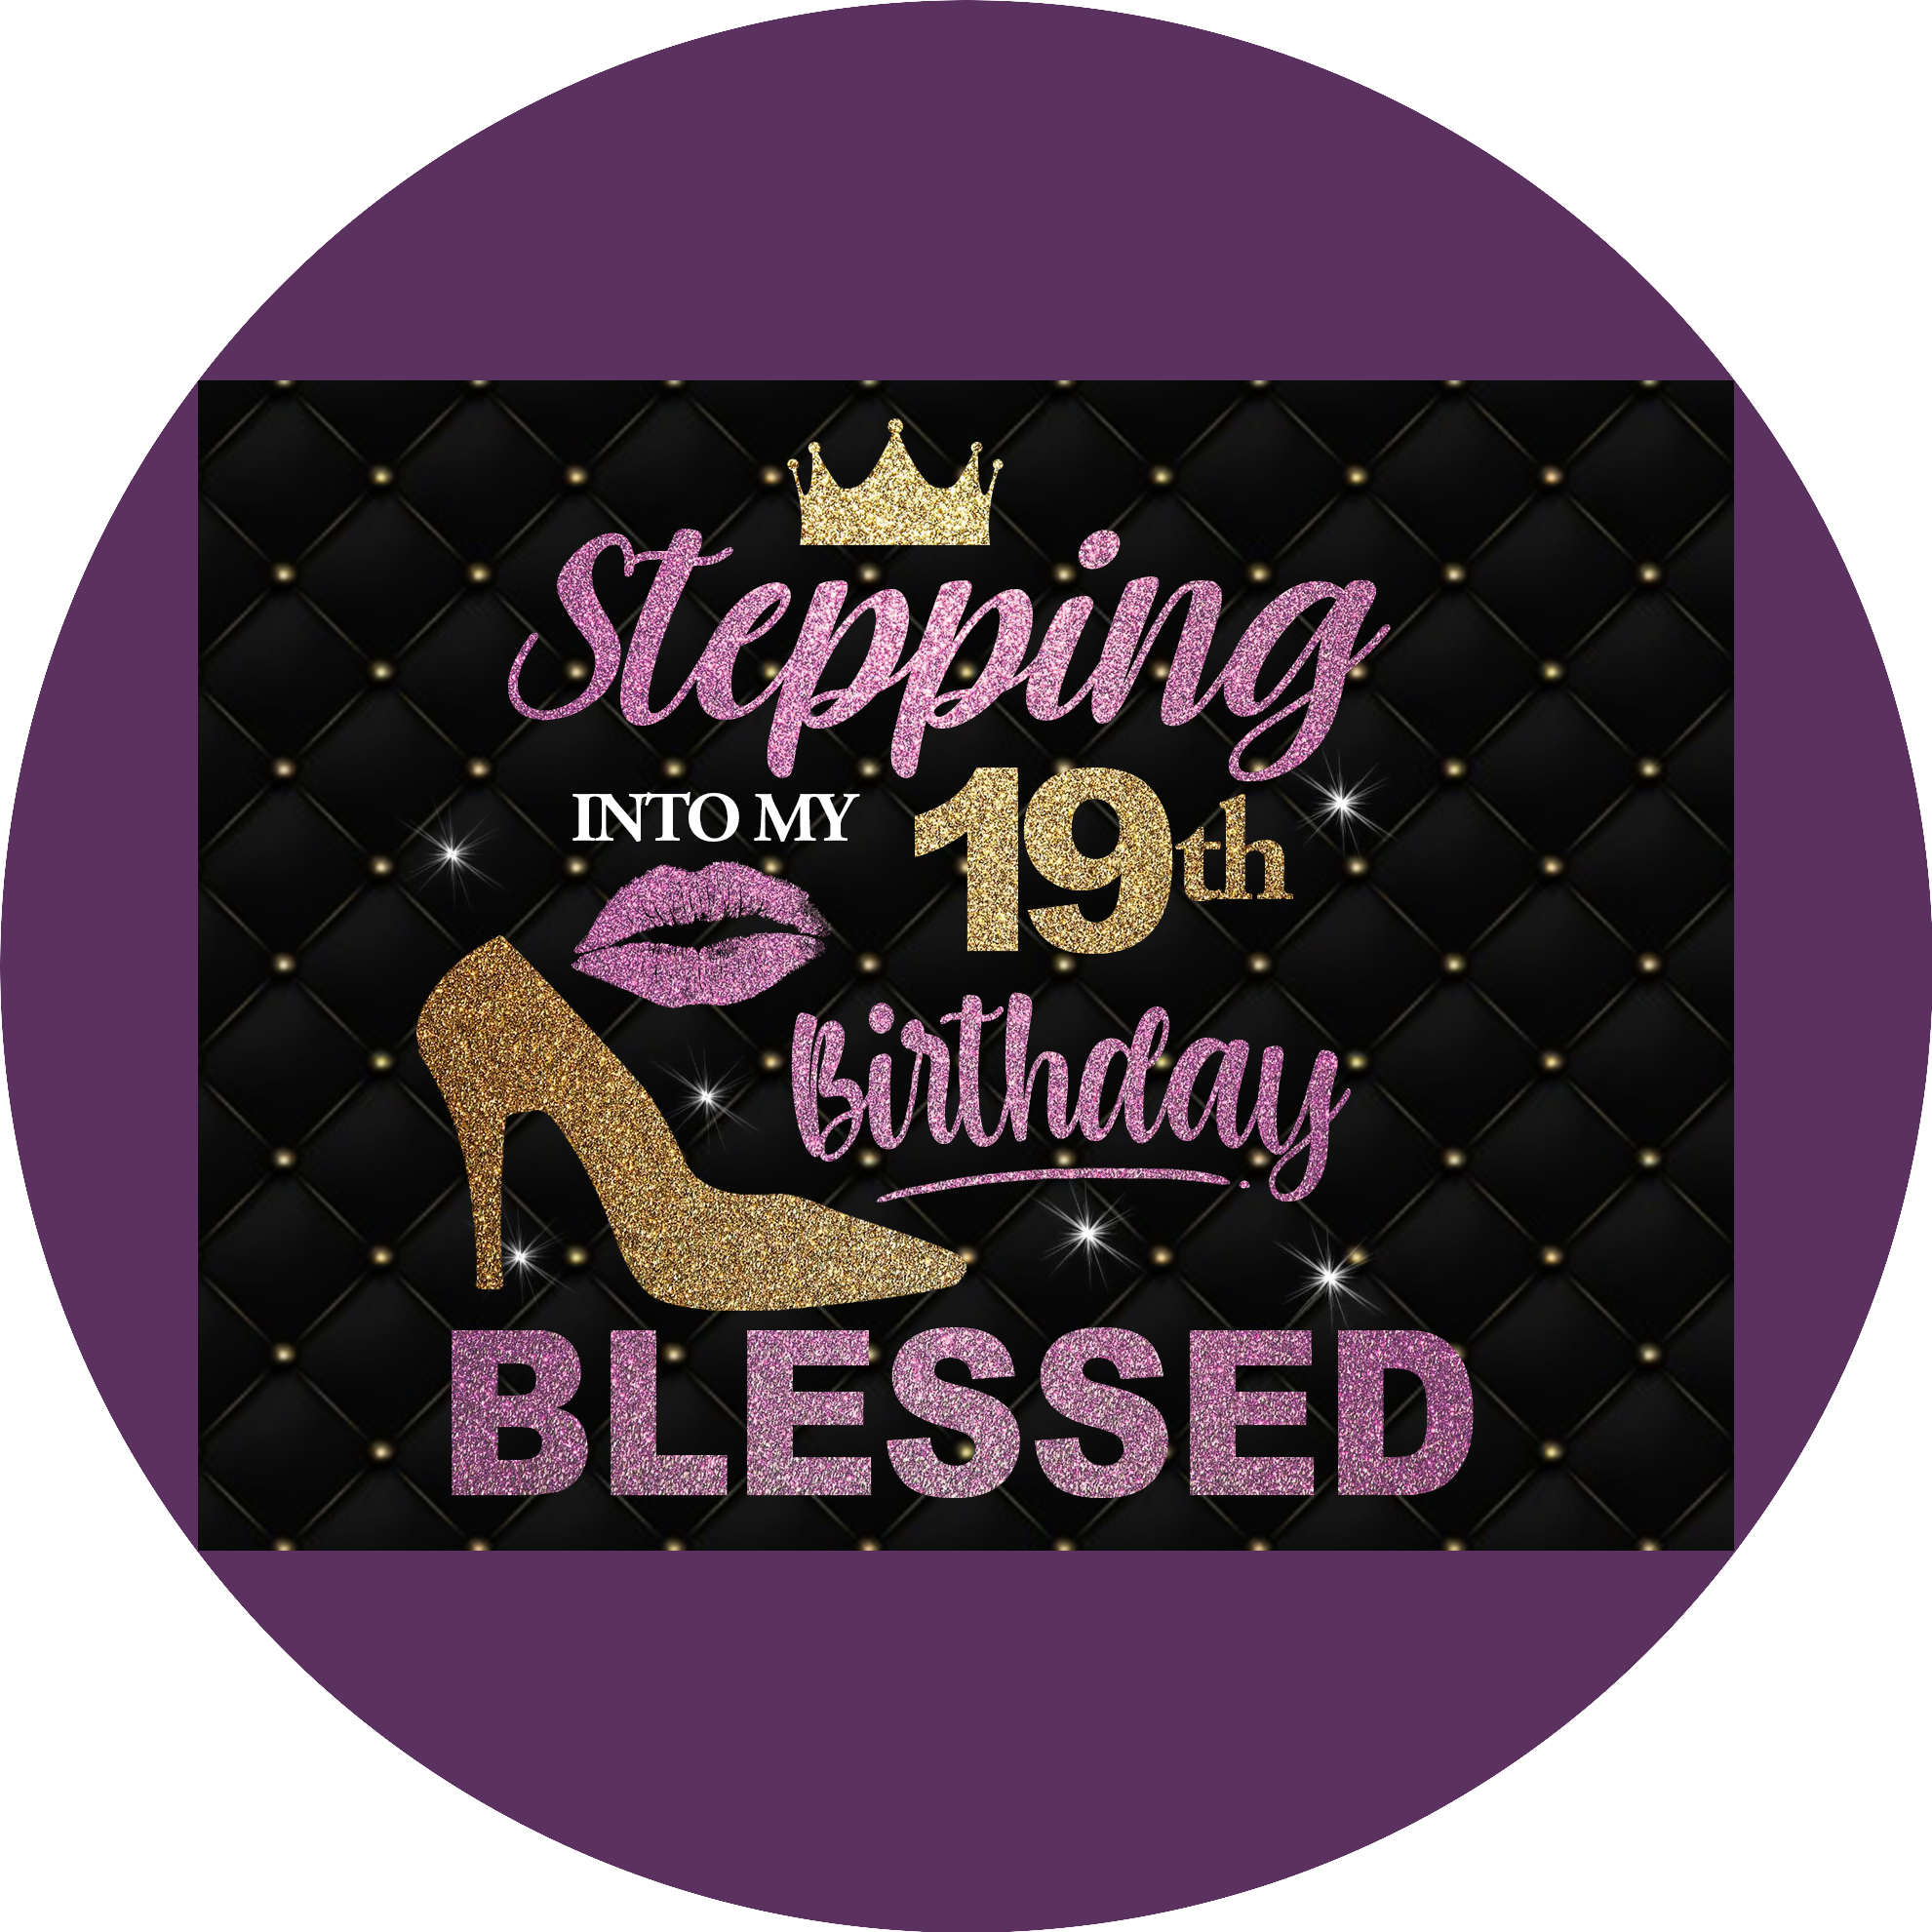 Stepping Into My 19th Birthday Blessed Crown High Heel Shoe Lips Edible Cake Topper Image ABPID56049